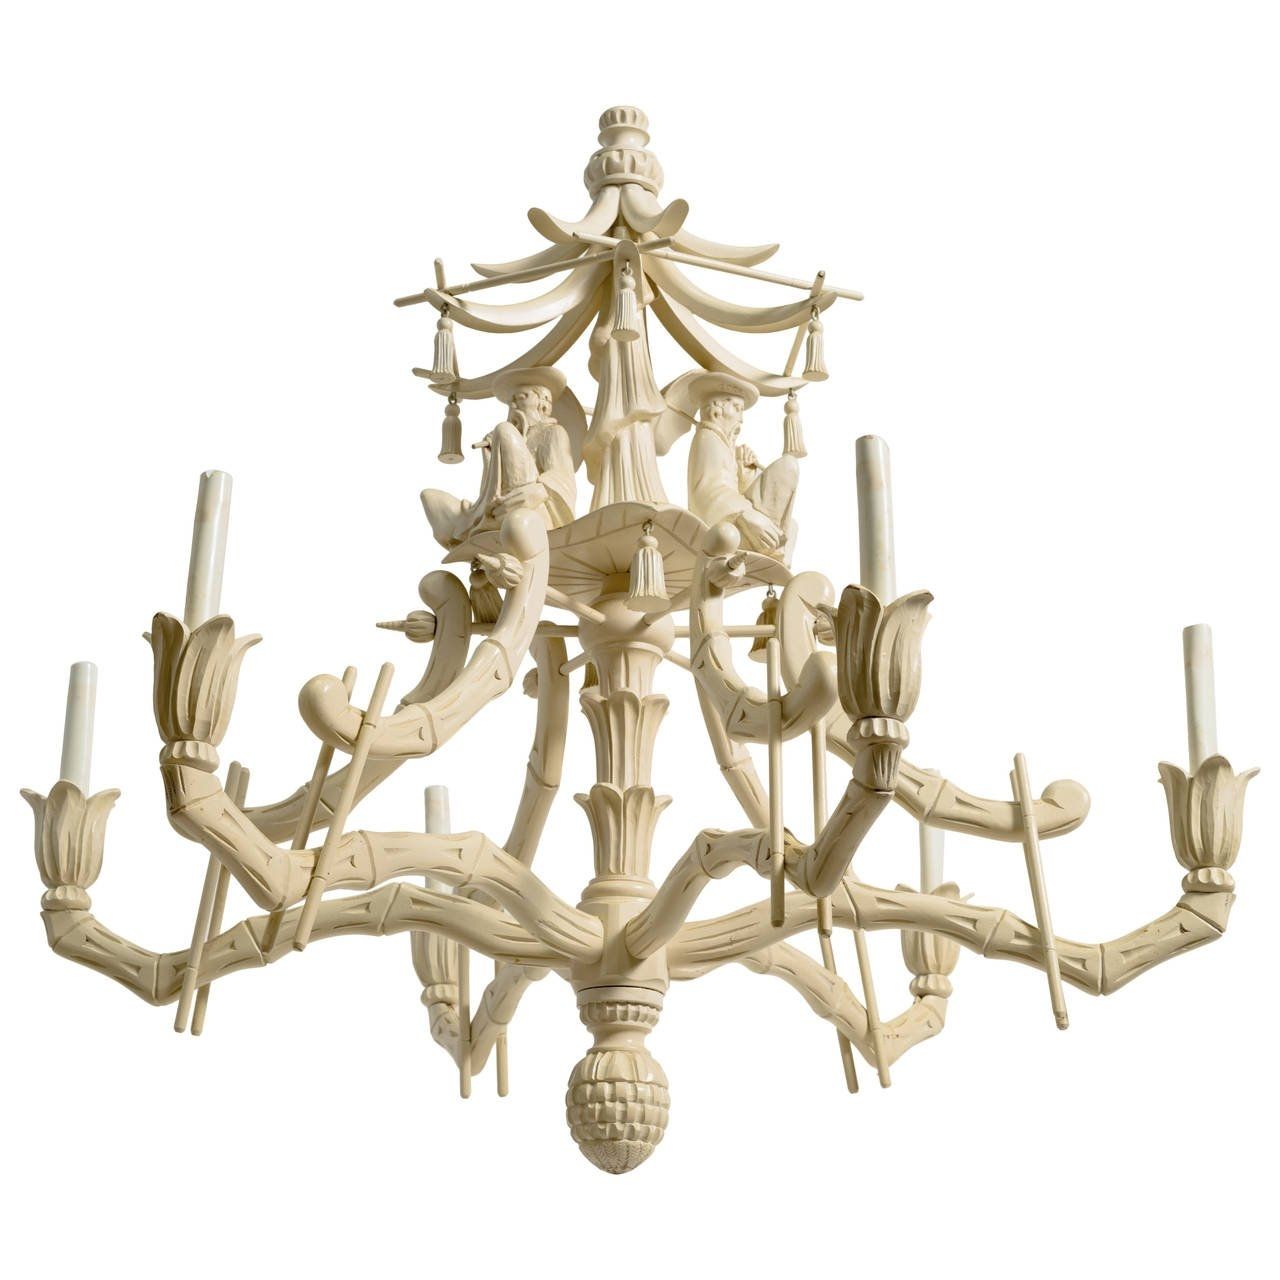 Asian Modern Carved Wood Pagoda Chandelier At 1stdibs Regarding Asian Chandeliers (View 7 of 25)